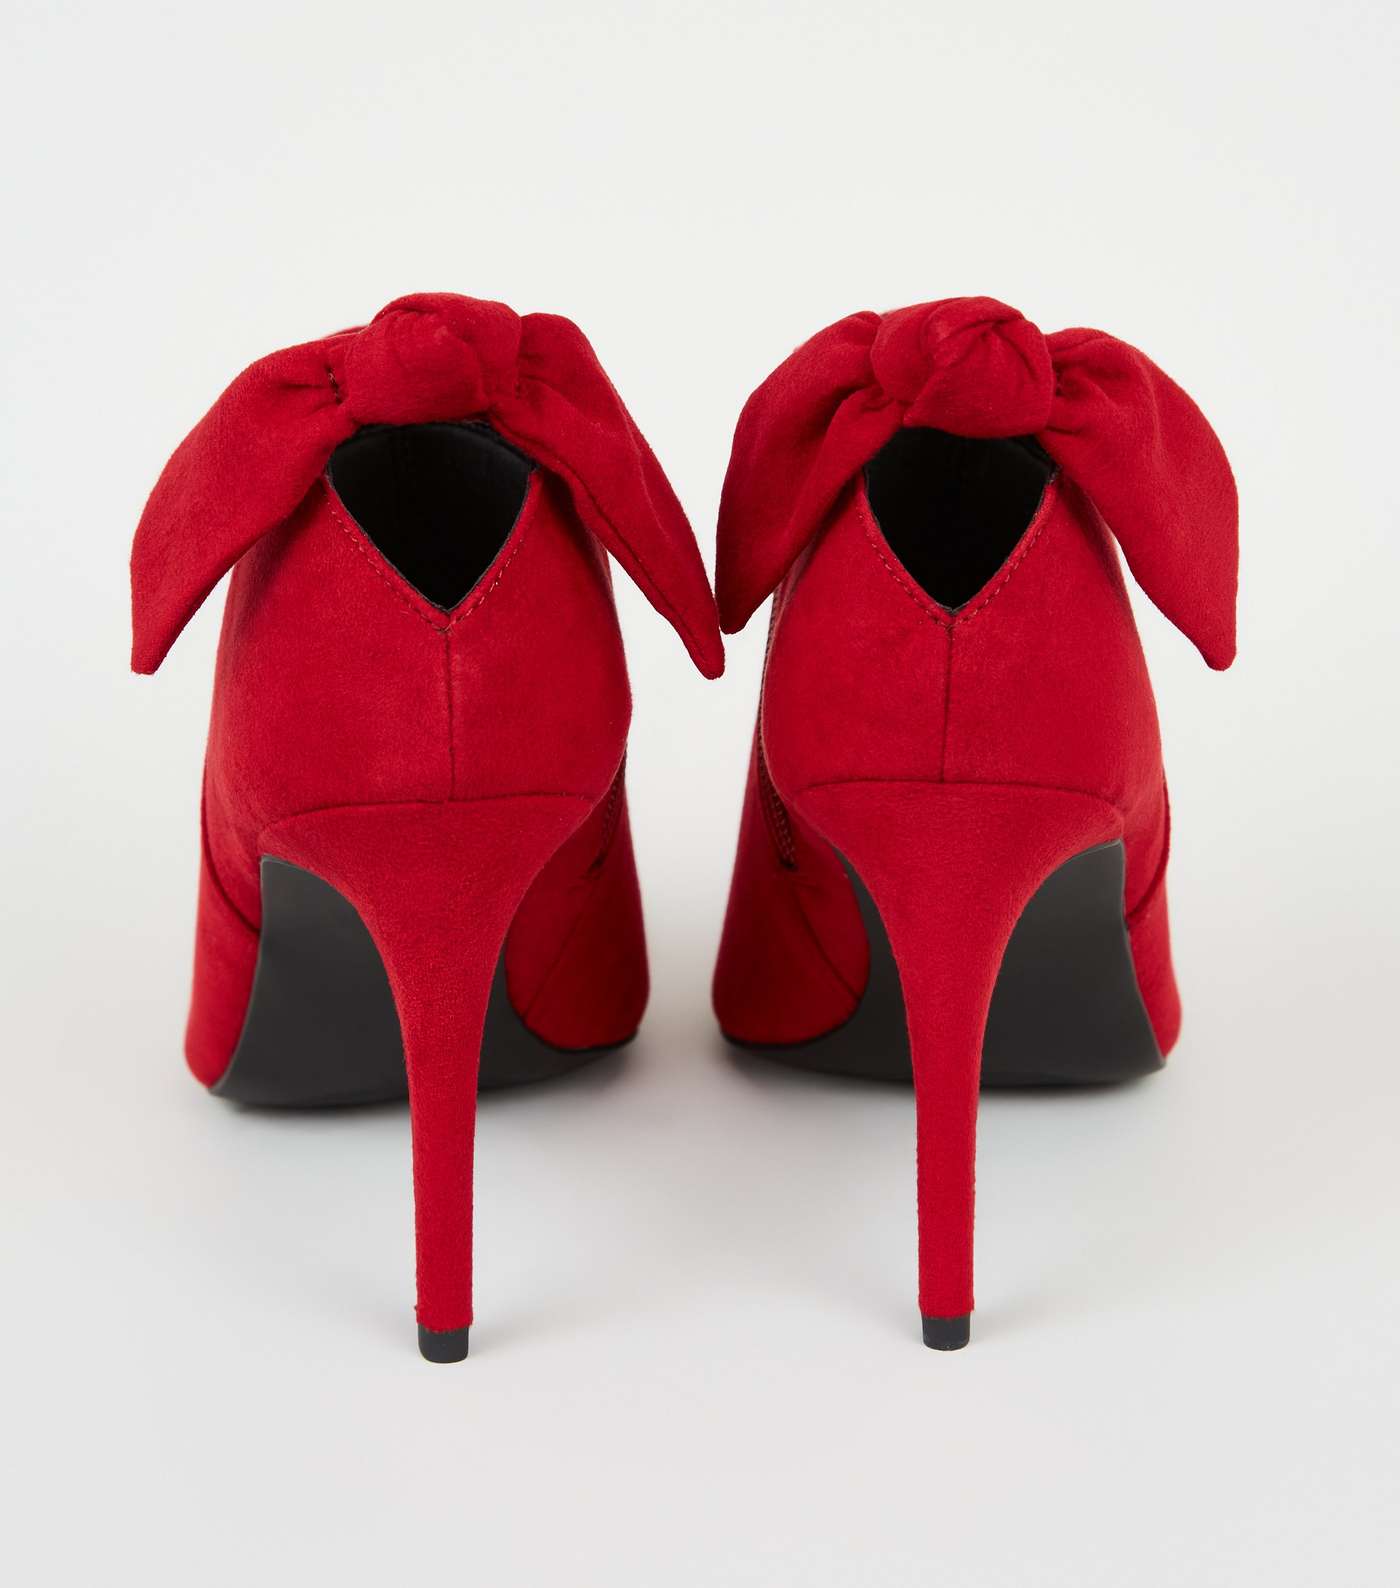 Red Suedette Bow Back Shoe Boots Image 4